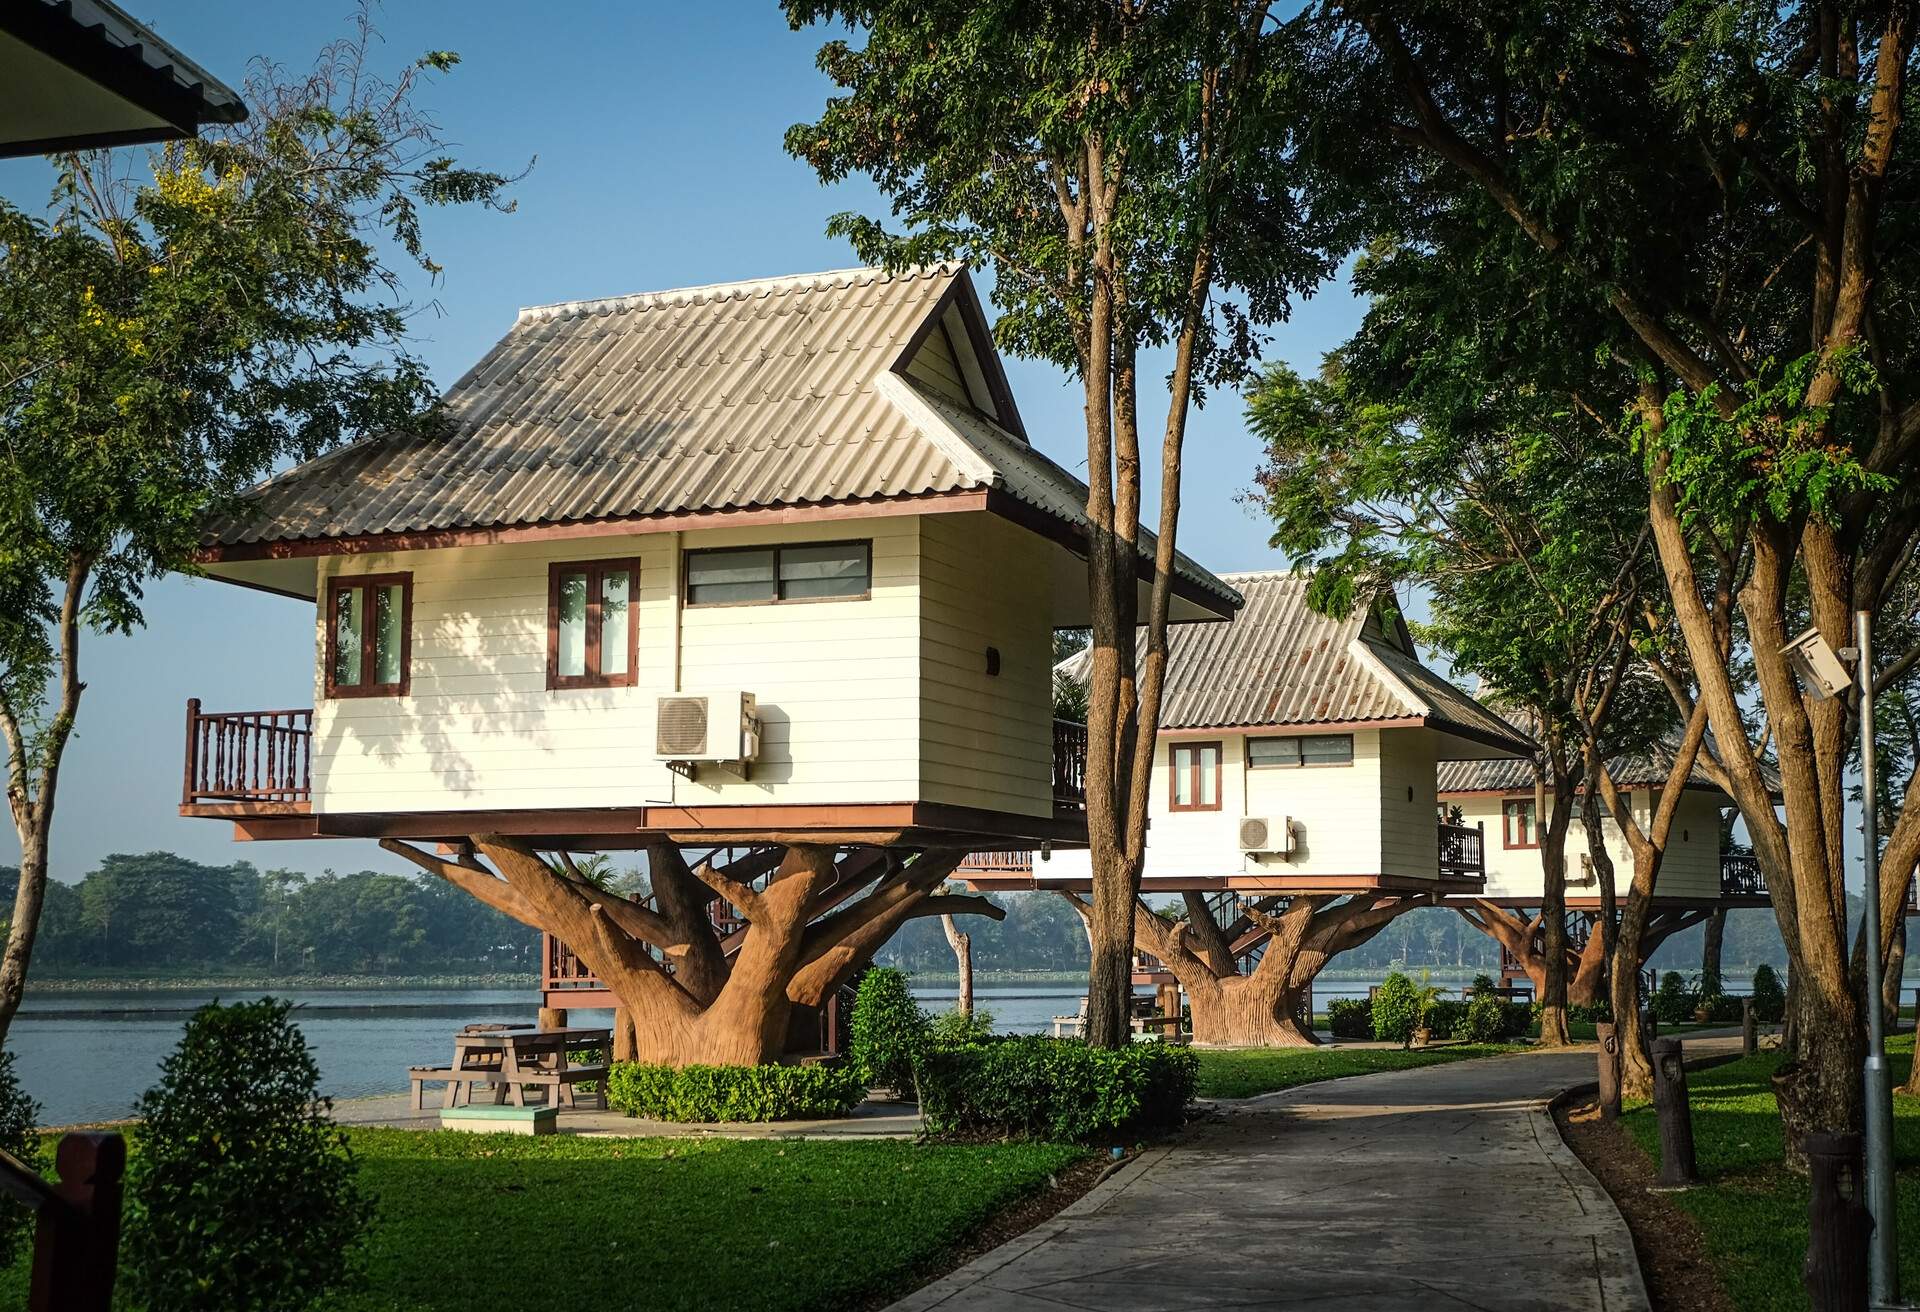 A row of tree houses along the shore lined with concrete pathways and lush trees.